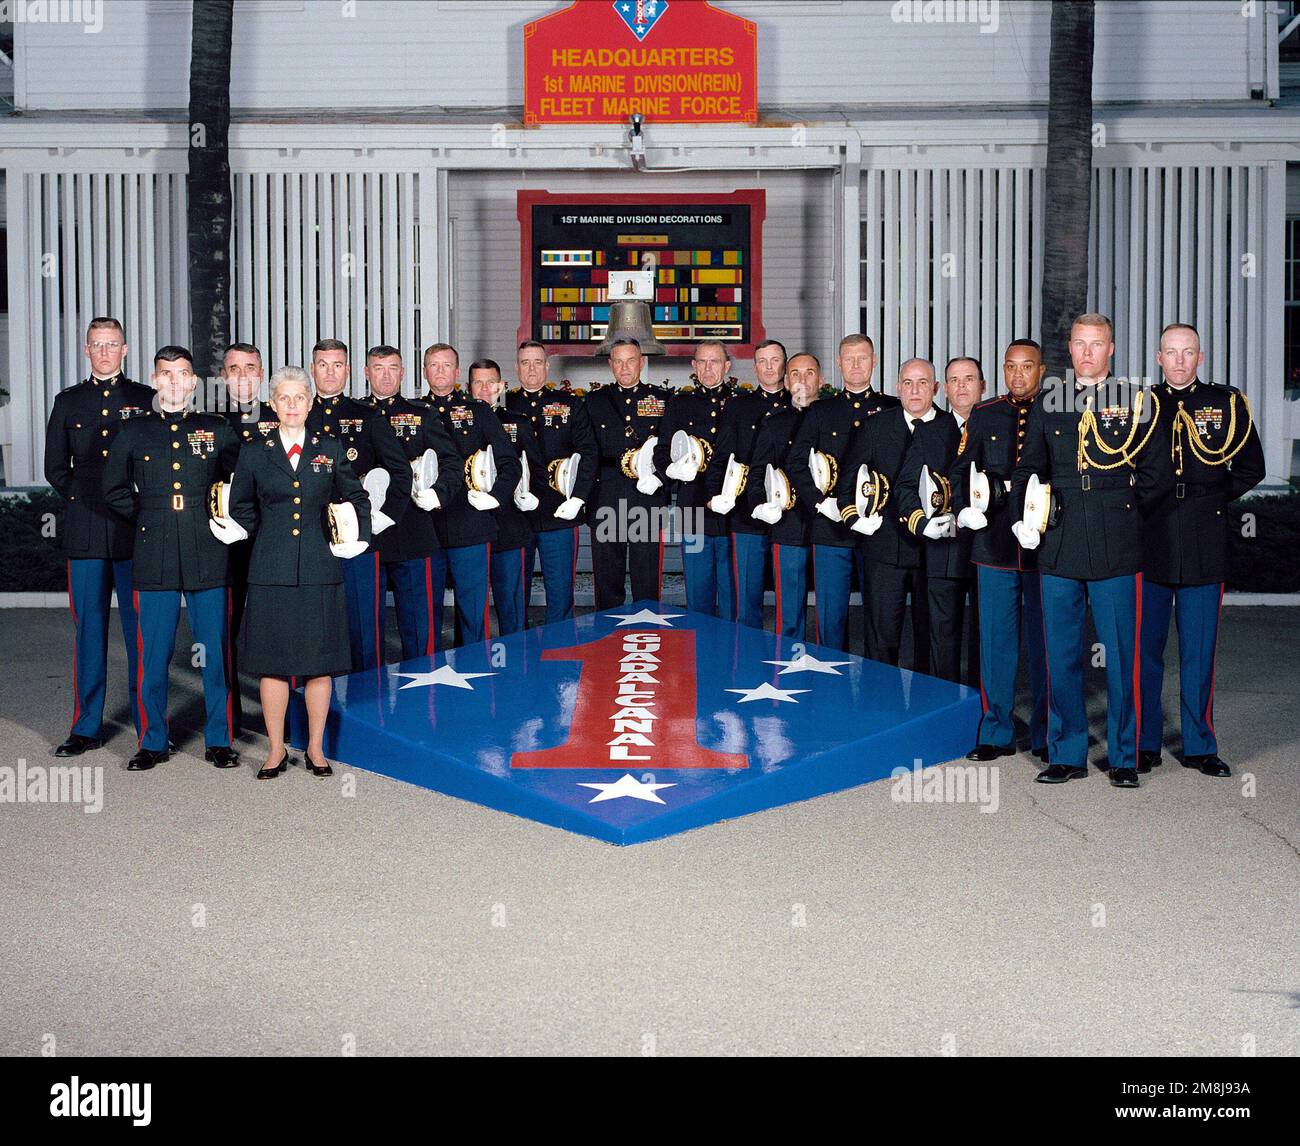 Exterior, MLS, MG Charles E. Wilhelm, USMC, Commanding General 1ST Marine Division and 18 members of his principal staff, in dress blues and holding hats, line up on two sides of a large replica of the 1ST Marine Division Patch and Seal. In background behind the staff is a sign, 'HEADQUARTERS 1ST MARINE DIVISION (REIN) FLEET MARINE FORCE'. Behind the staff is a large plaque showing the 1ST marine Division's Decorations and a ship's bell. The bell is from the USS WHARTON (AP-7) a WW II Troop Transport. The ship was named for the third Commandant of the Marine Corps, LTC Frank Wharton. Base: Mar Stock Photo